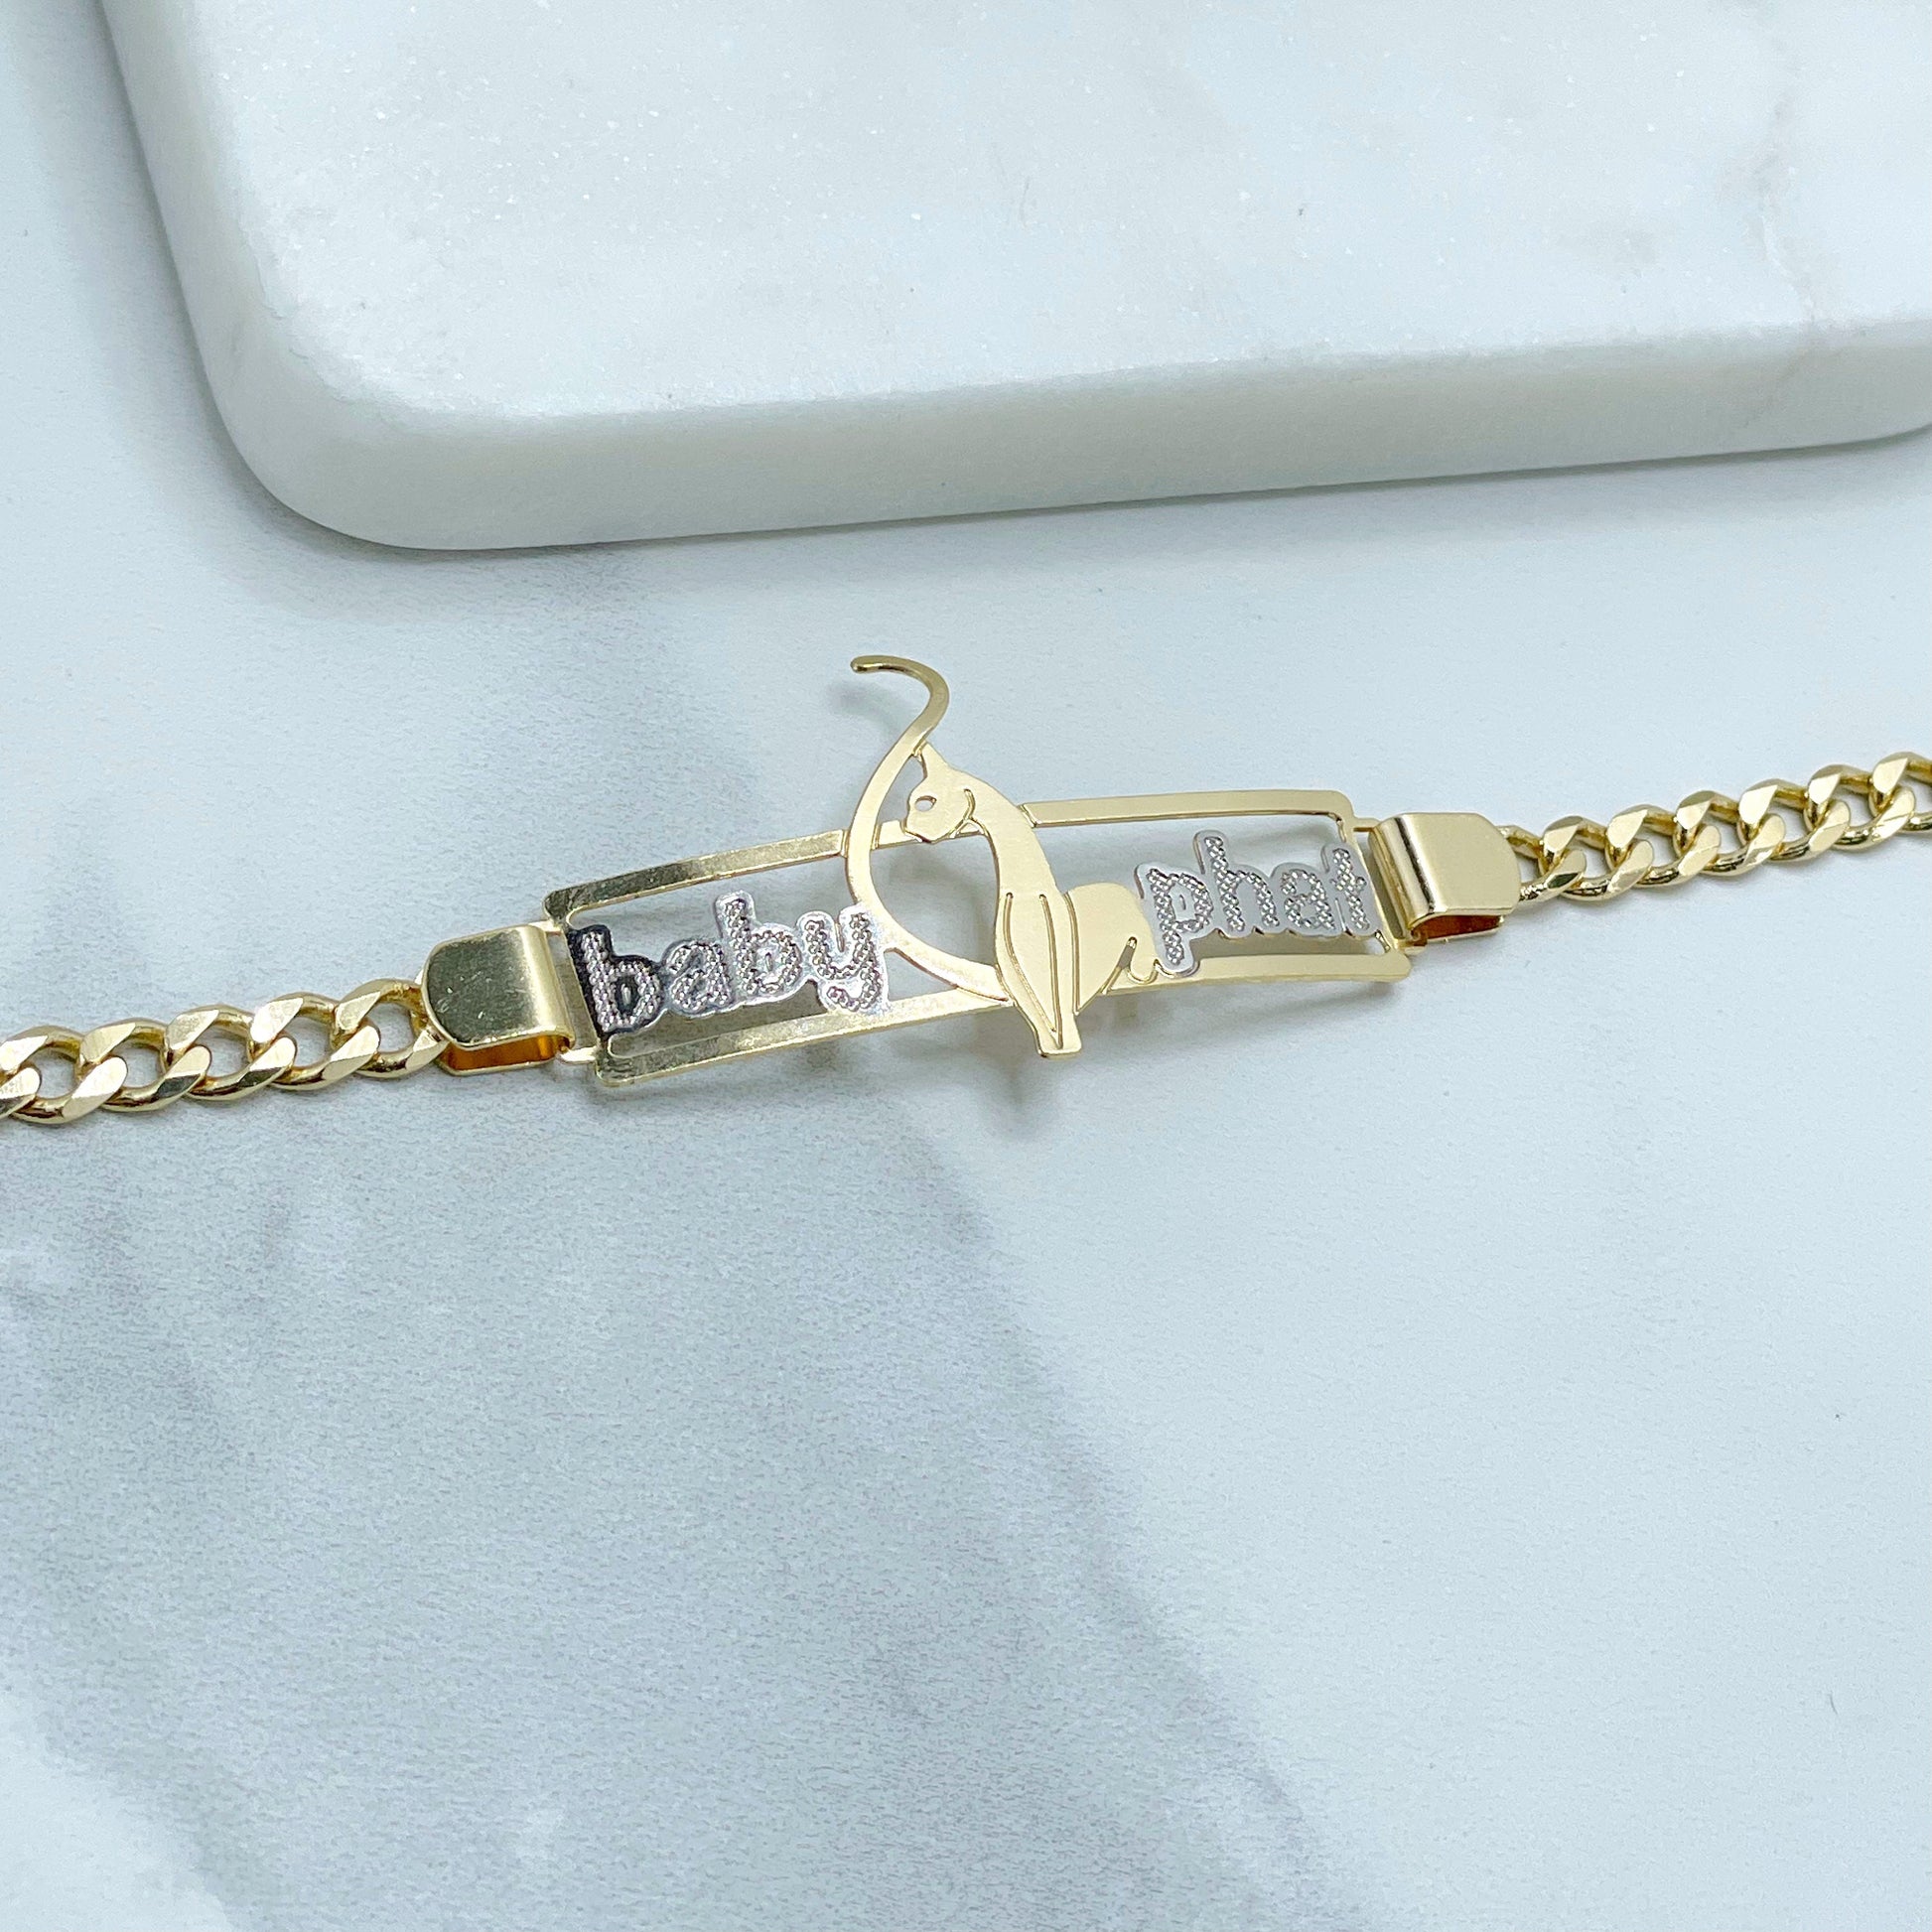 18k Gold Filled with White GF ''Baby Phat'' Word, Cat in Plate, CUBAN LINK Chain 8 inches Bracelet  Wholesale Jewelry Supplies